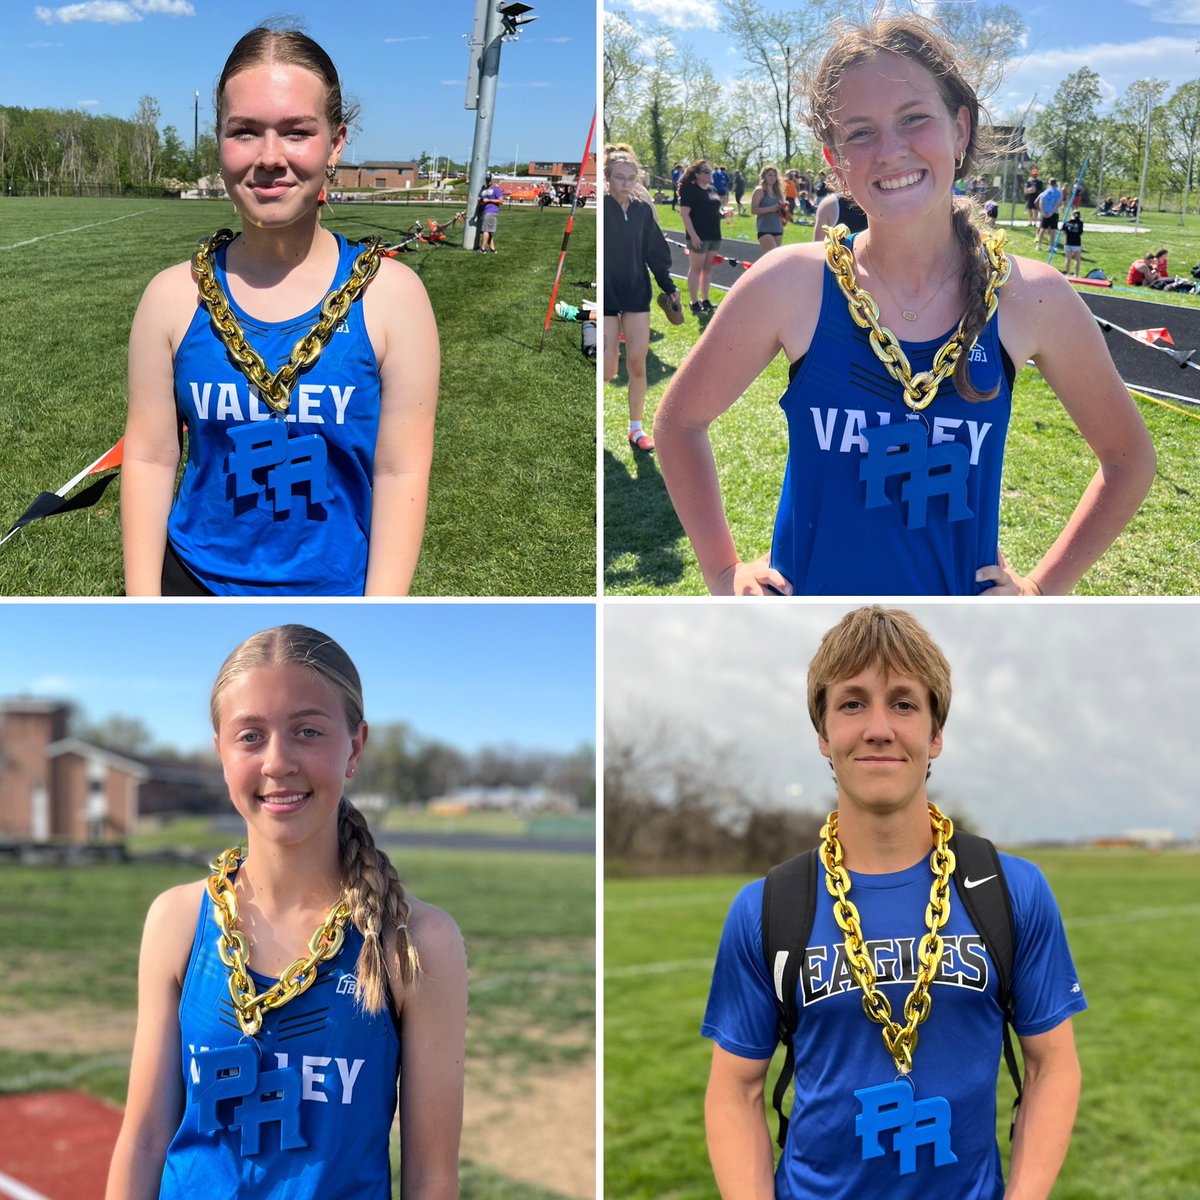 Conference was last meet for @GVSD_Track Jav Crew before Districts.We not only won 3 golds, we had 4 great kids PR! Genevieve Wheeler (27.20 JV champ) @Mojo14_2027 (31.56 3rd PR) @MadisonRust3 (39.00 Ranked 1st Fr in MO & 4th in US) Asa Keim (45.62 after winning PV) #OneValley